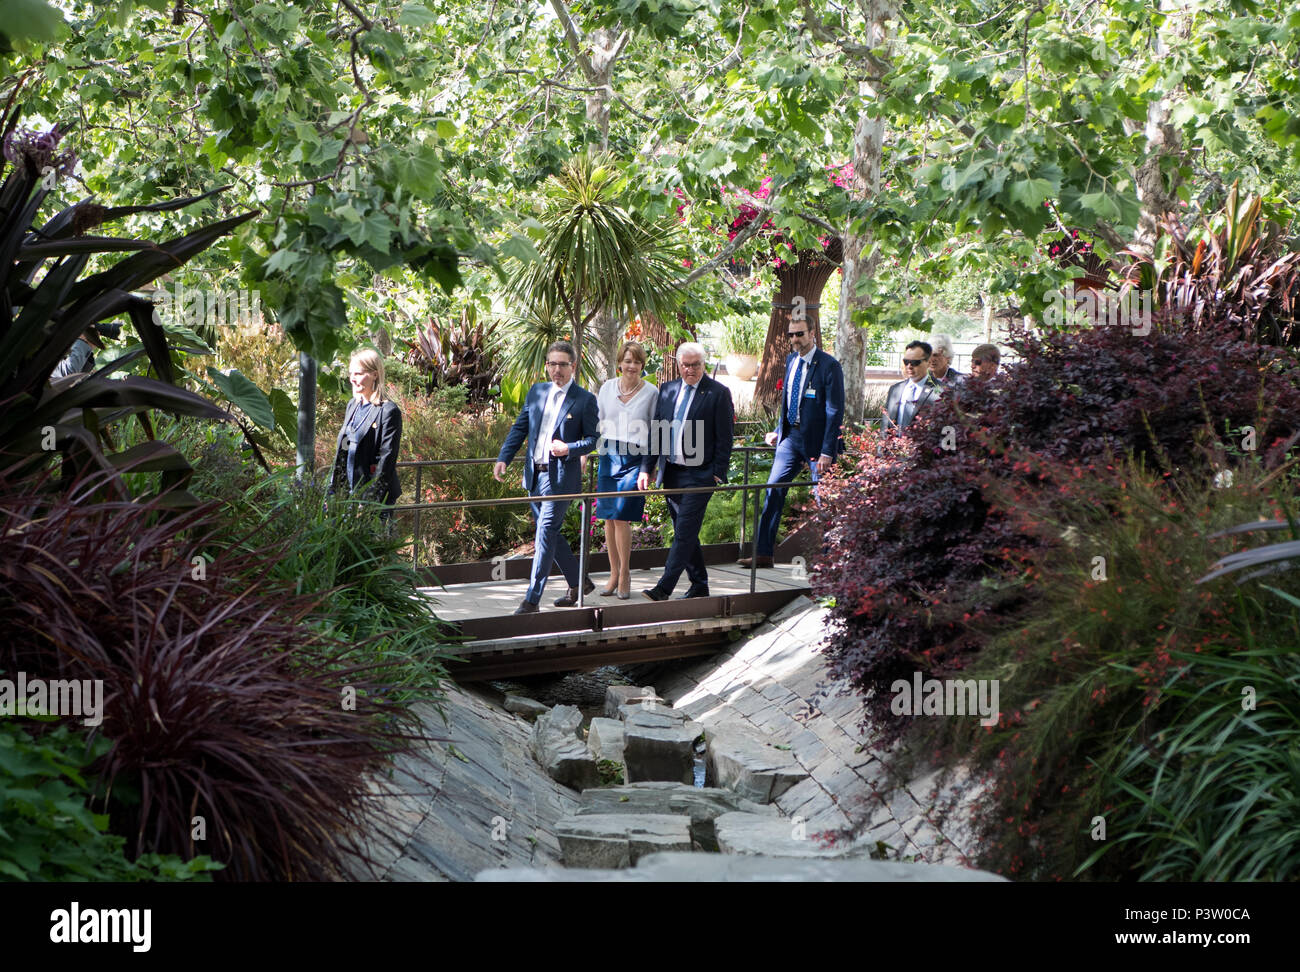 19 June 2018, USA, Los Angeles (California): German President Frank-Walter Steinmeier and his wife Elke Buedenbender, are guided through the complex and the garden of the Getty Museum by the deputy director of the Getty Research Institute, Andrew Perchuk. President Steinmeier and his wife are on a three day visit to California. Photo: Bernd von Jutrczenka/dpa Stock Photo